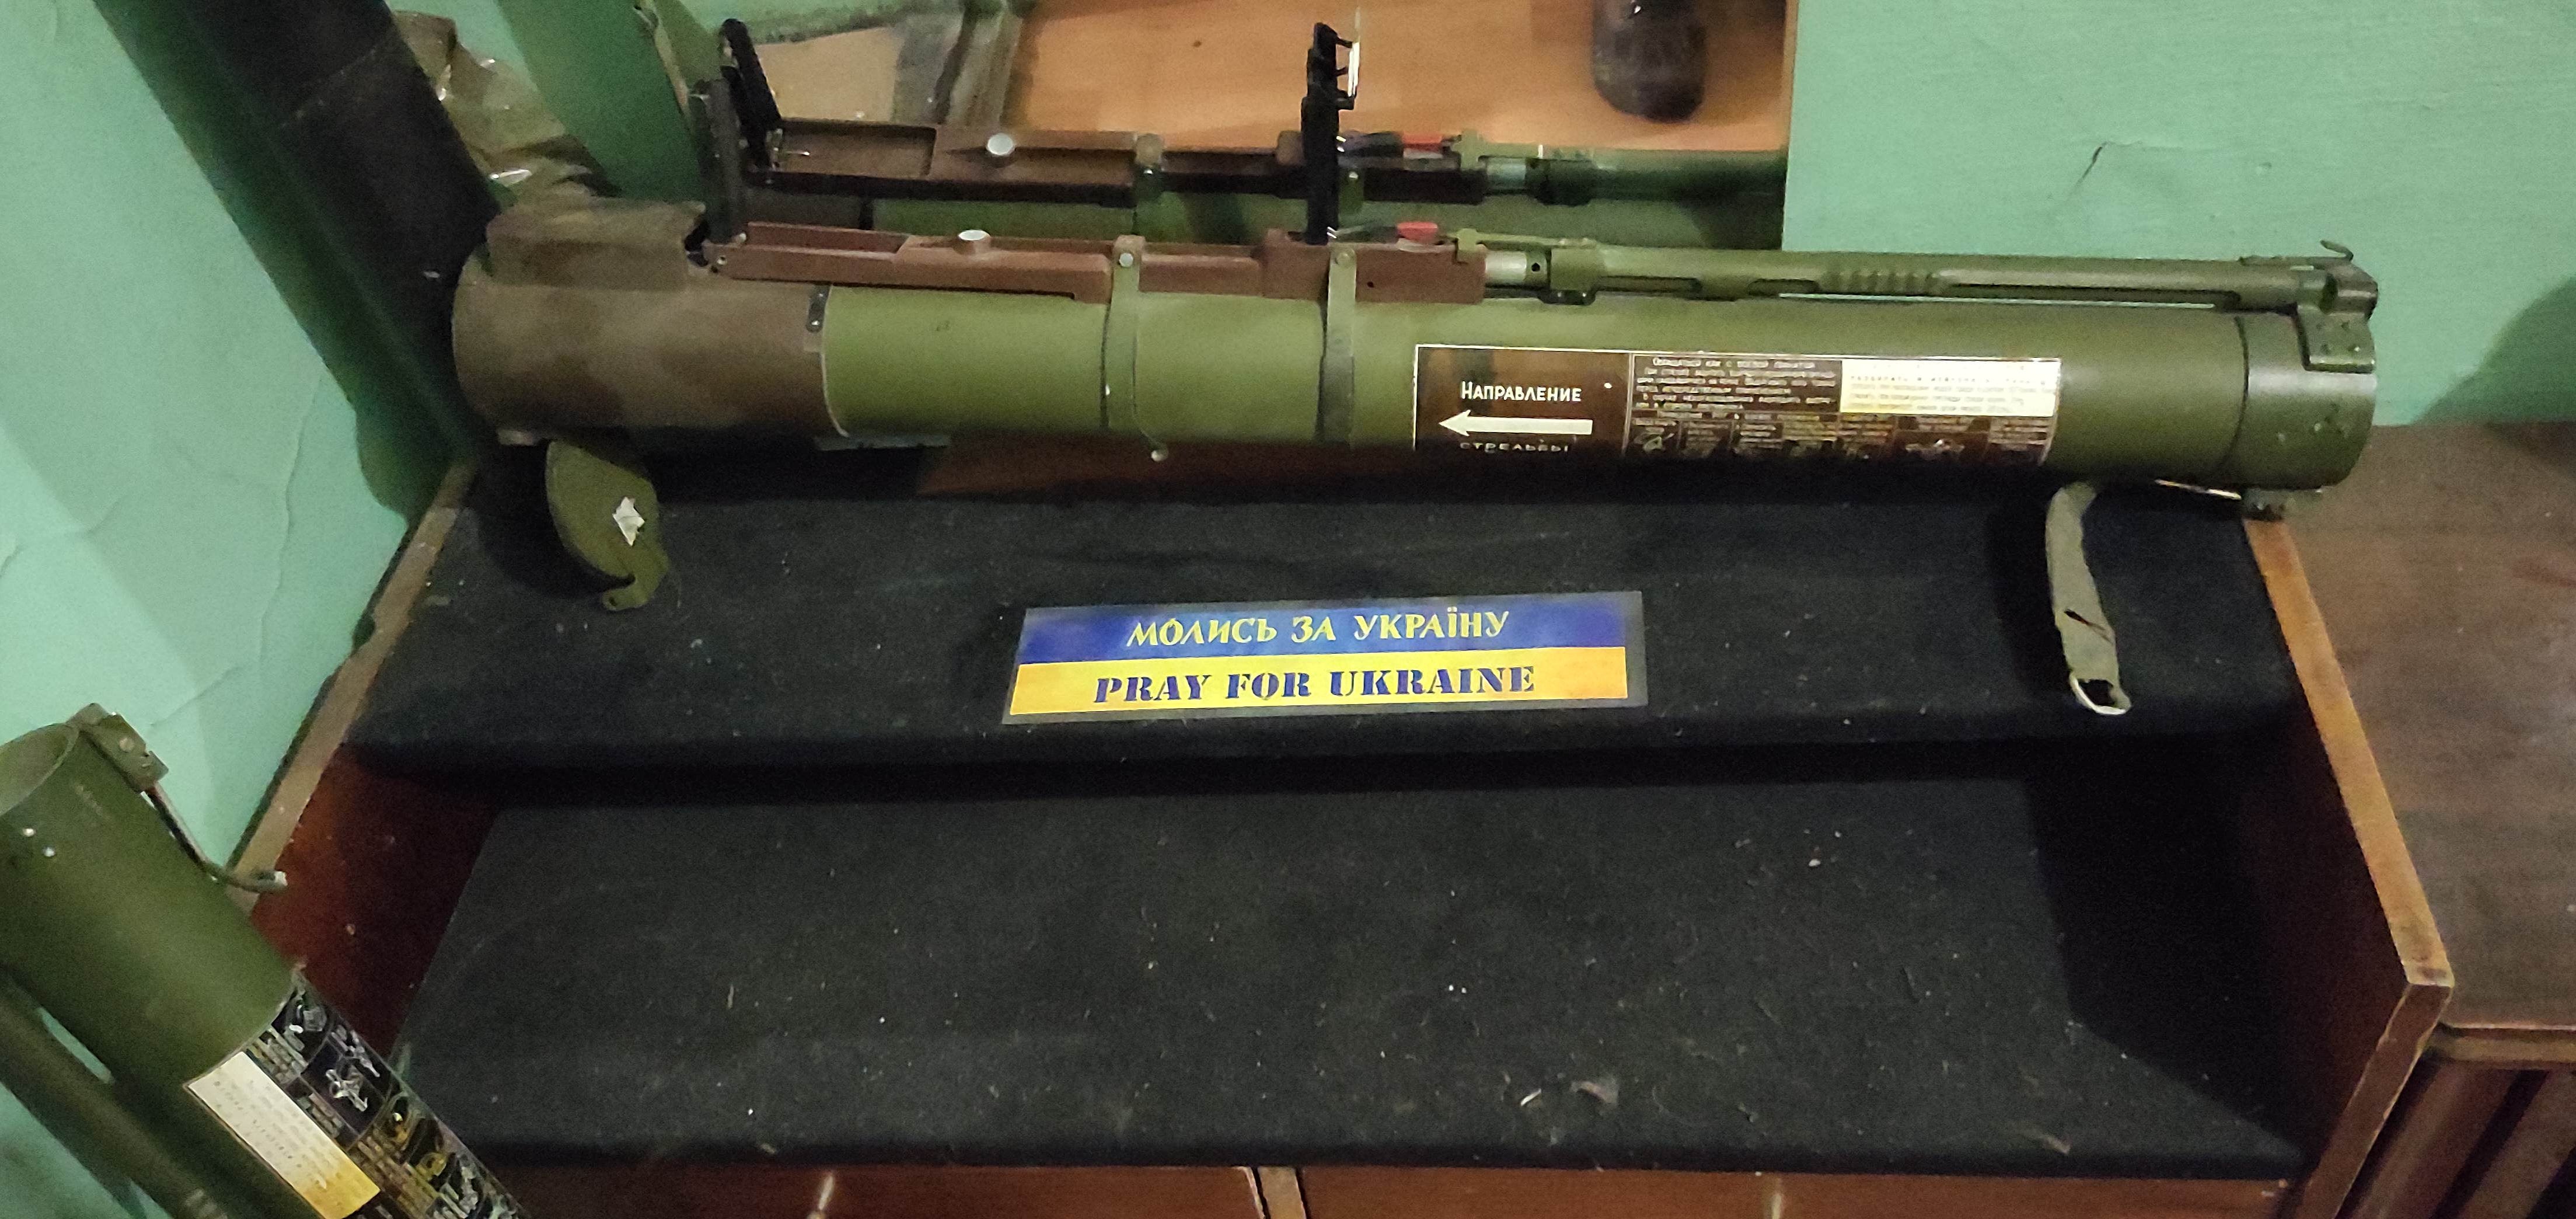 ‘Pray for Ukraine’: a missile on display at the unit’s museum